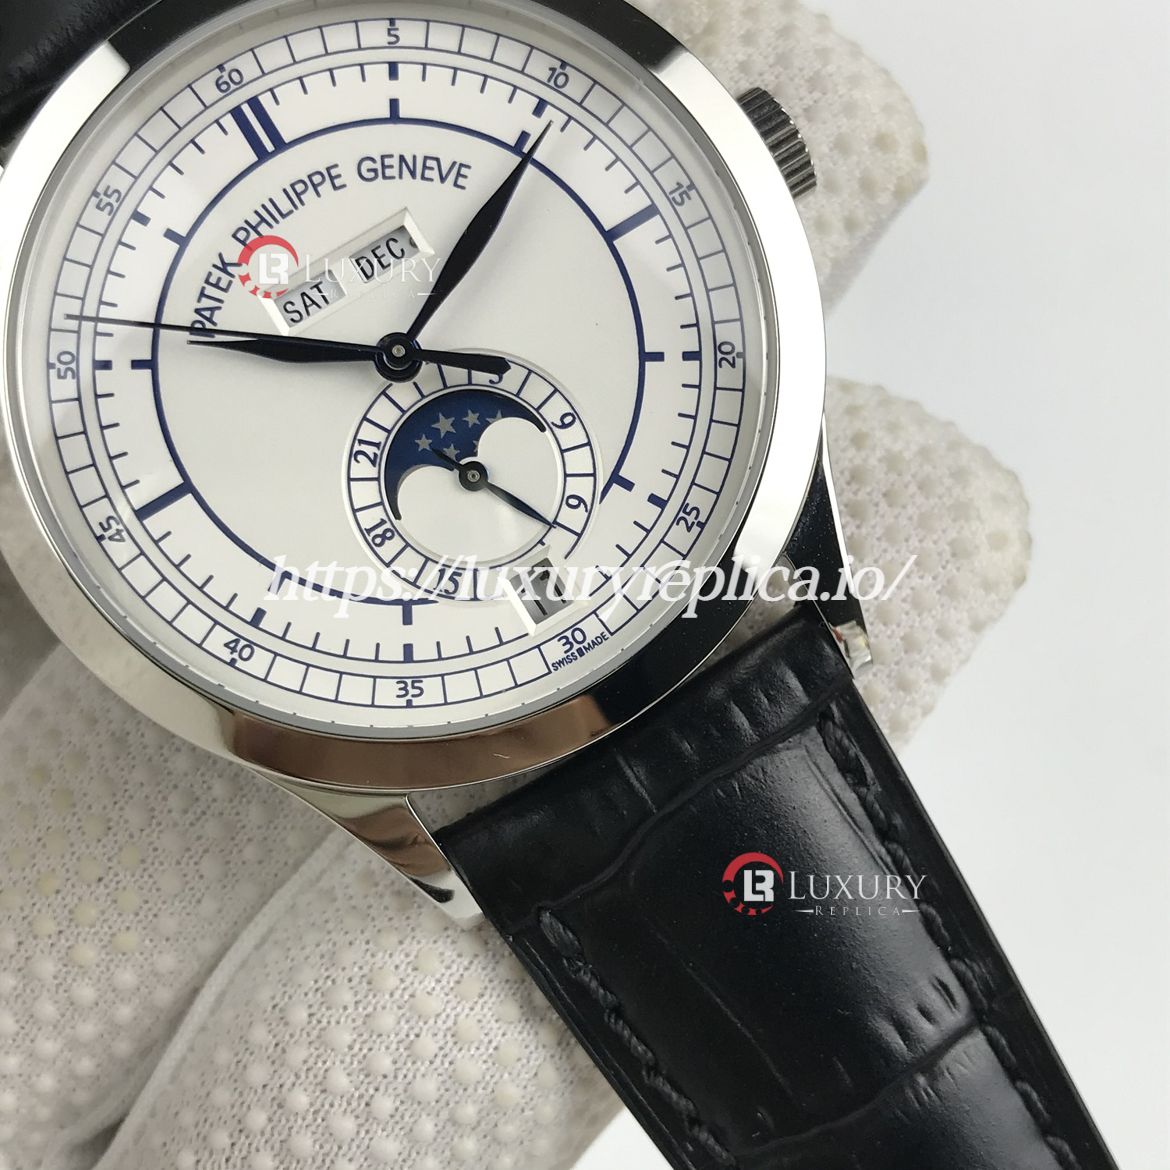 PATEK PHILIPPE COMPLICATIONS 5396G-001 38MM WHITE DIAL